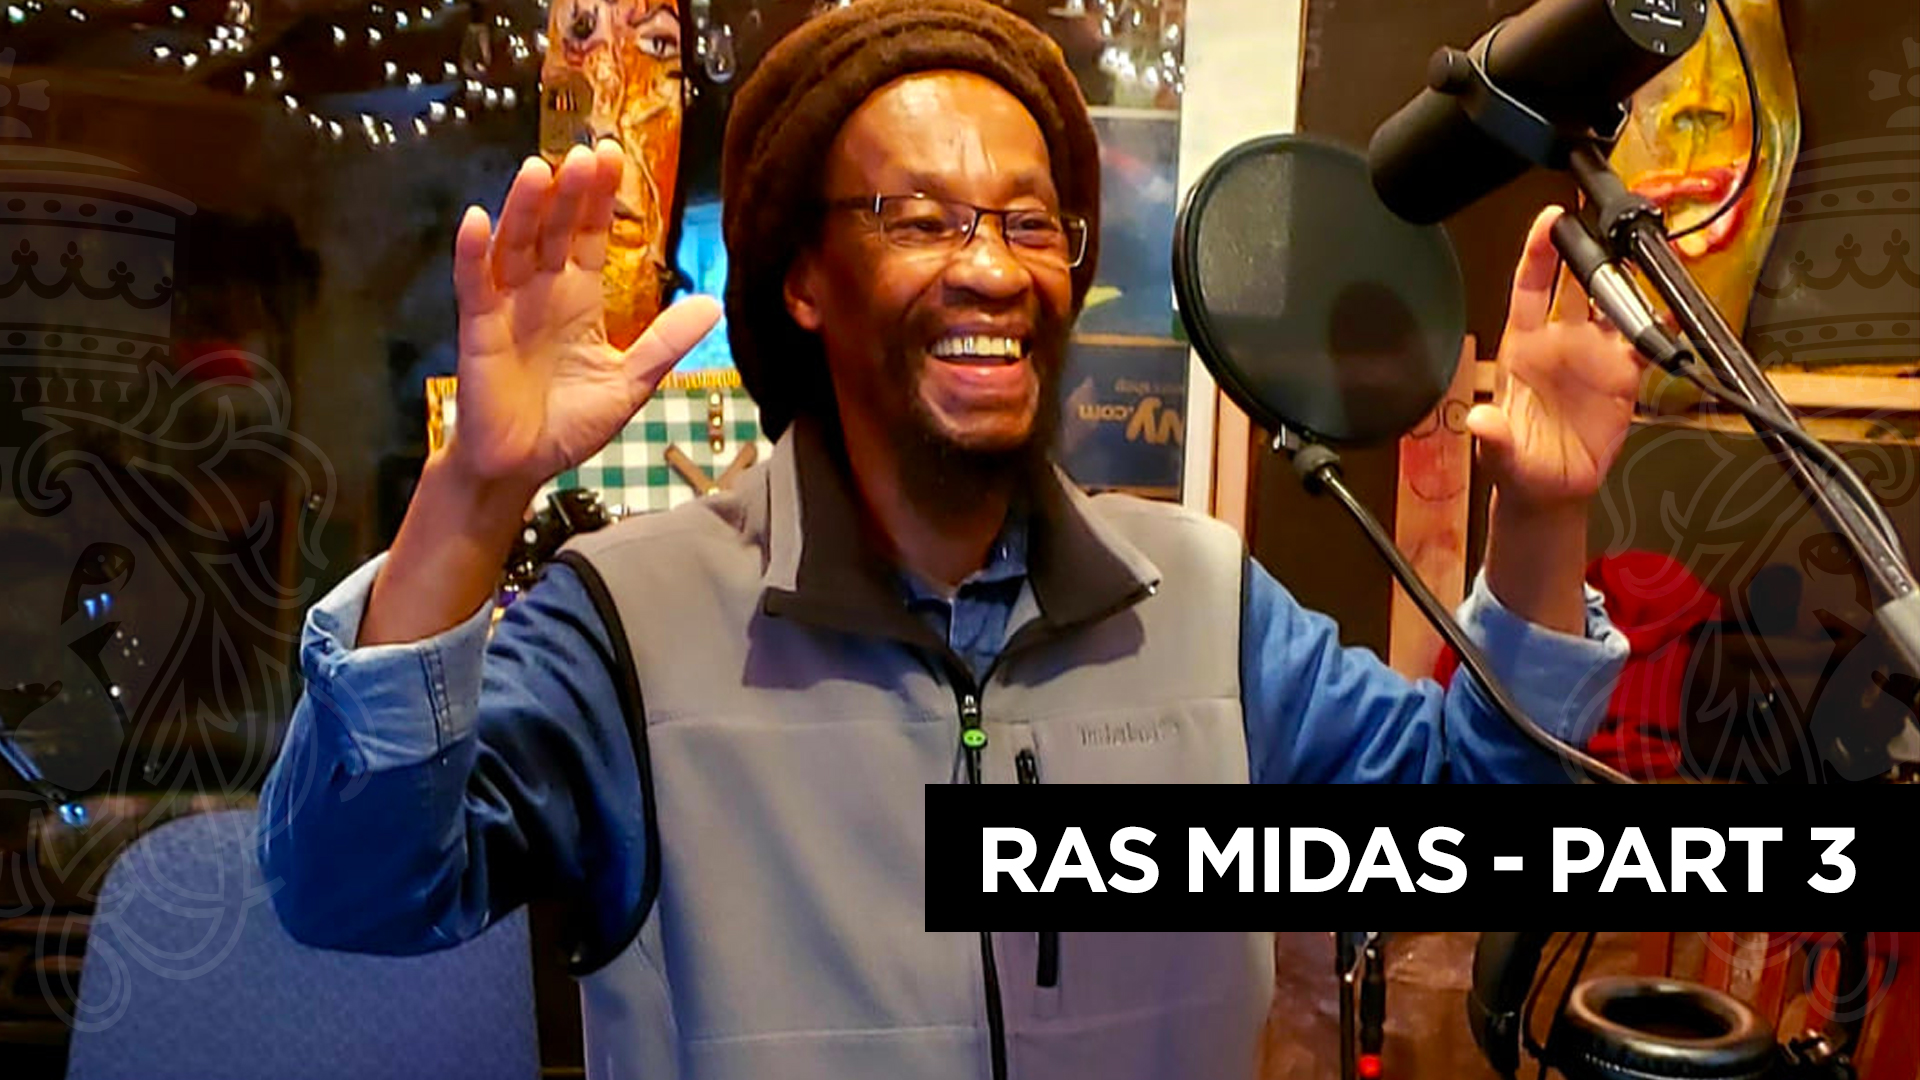 Ras Midas, an interview with Angus Taylor – Part 3